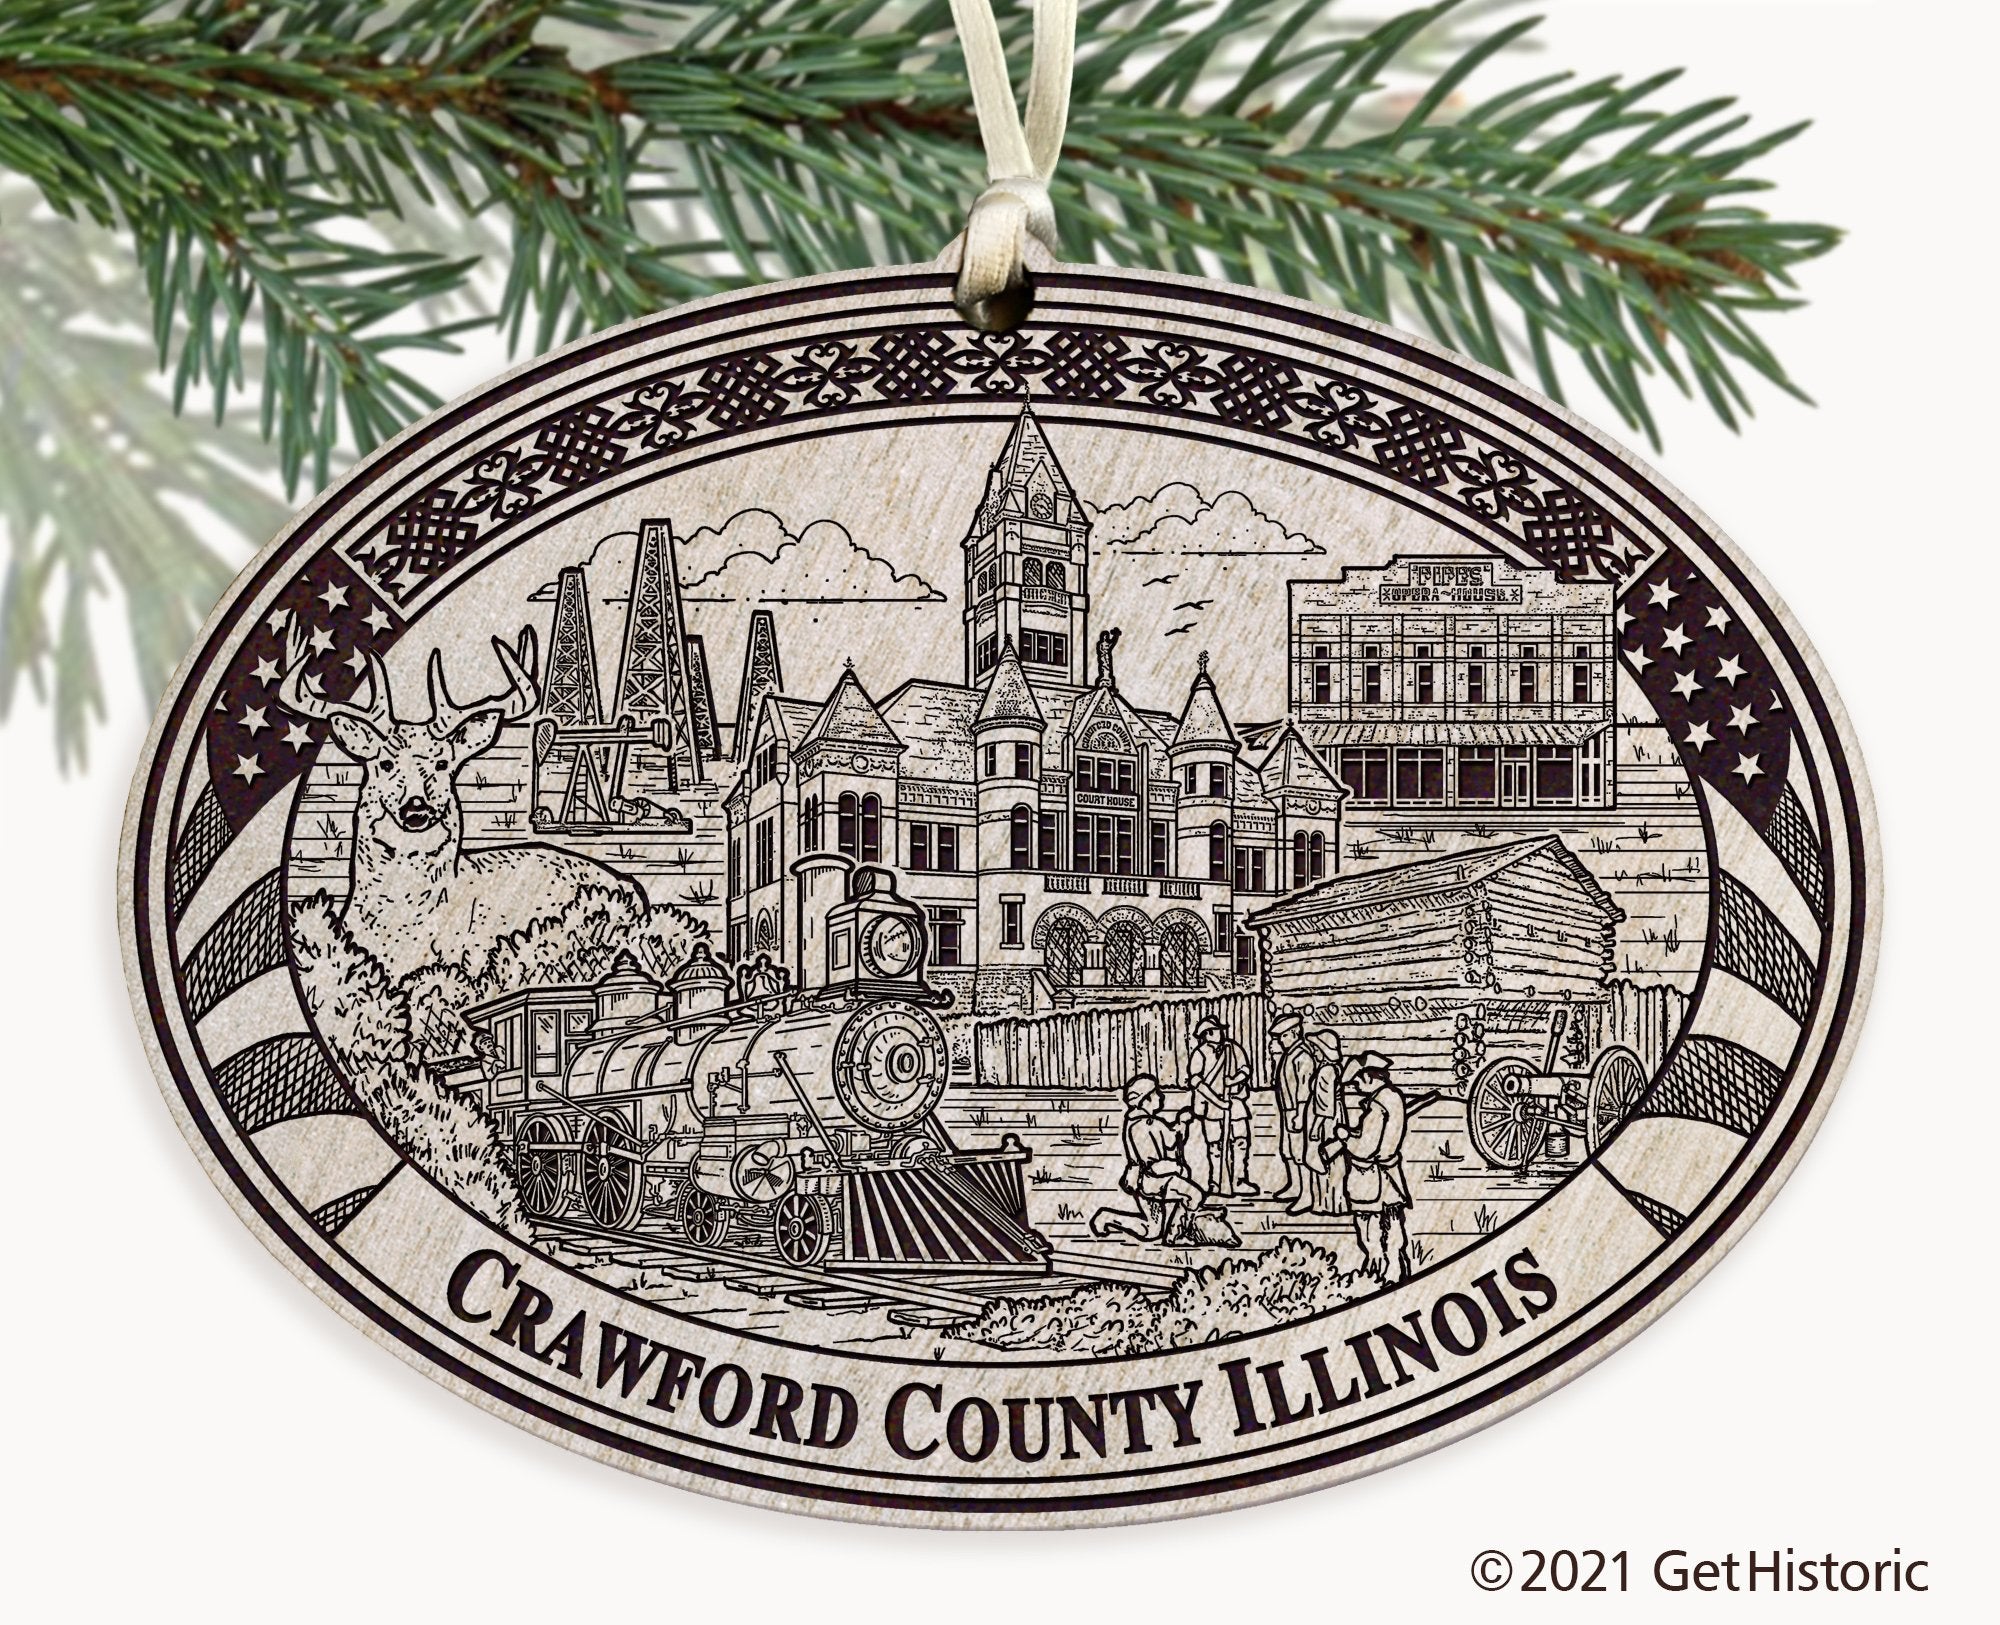 Crawford County Illinois Engraved Ornament